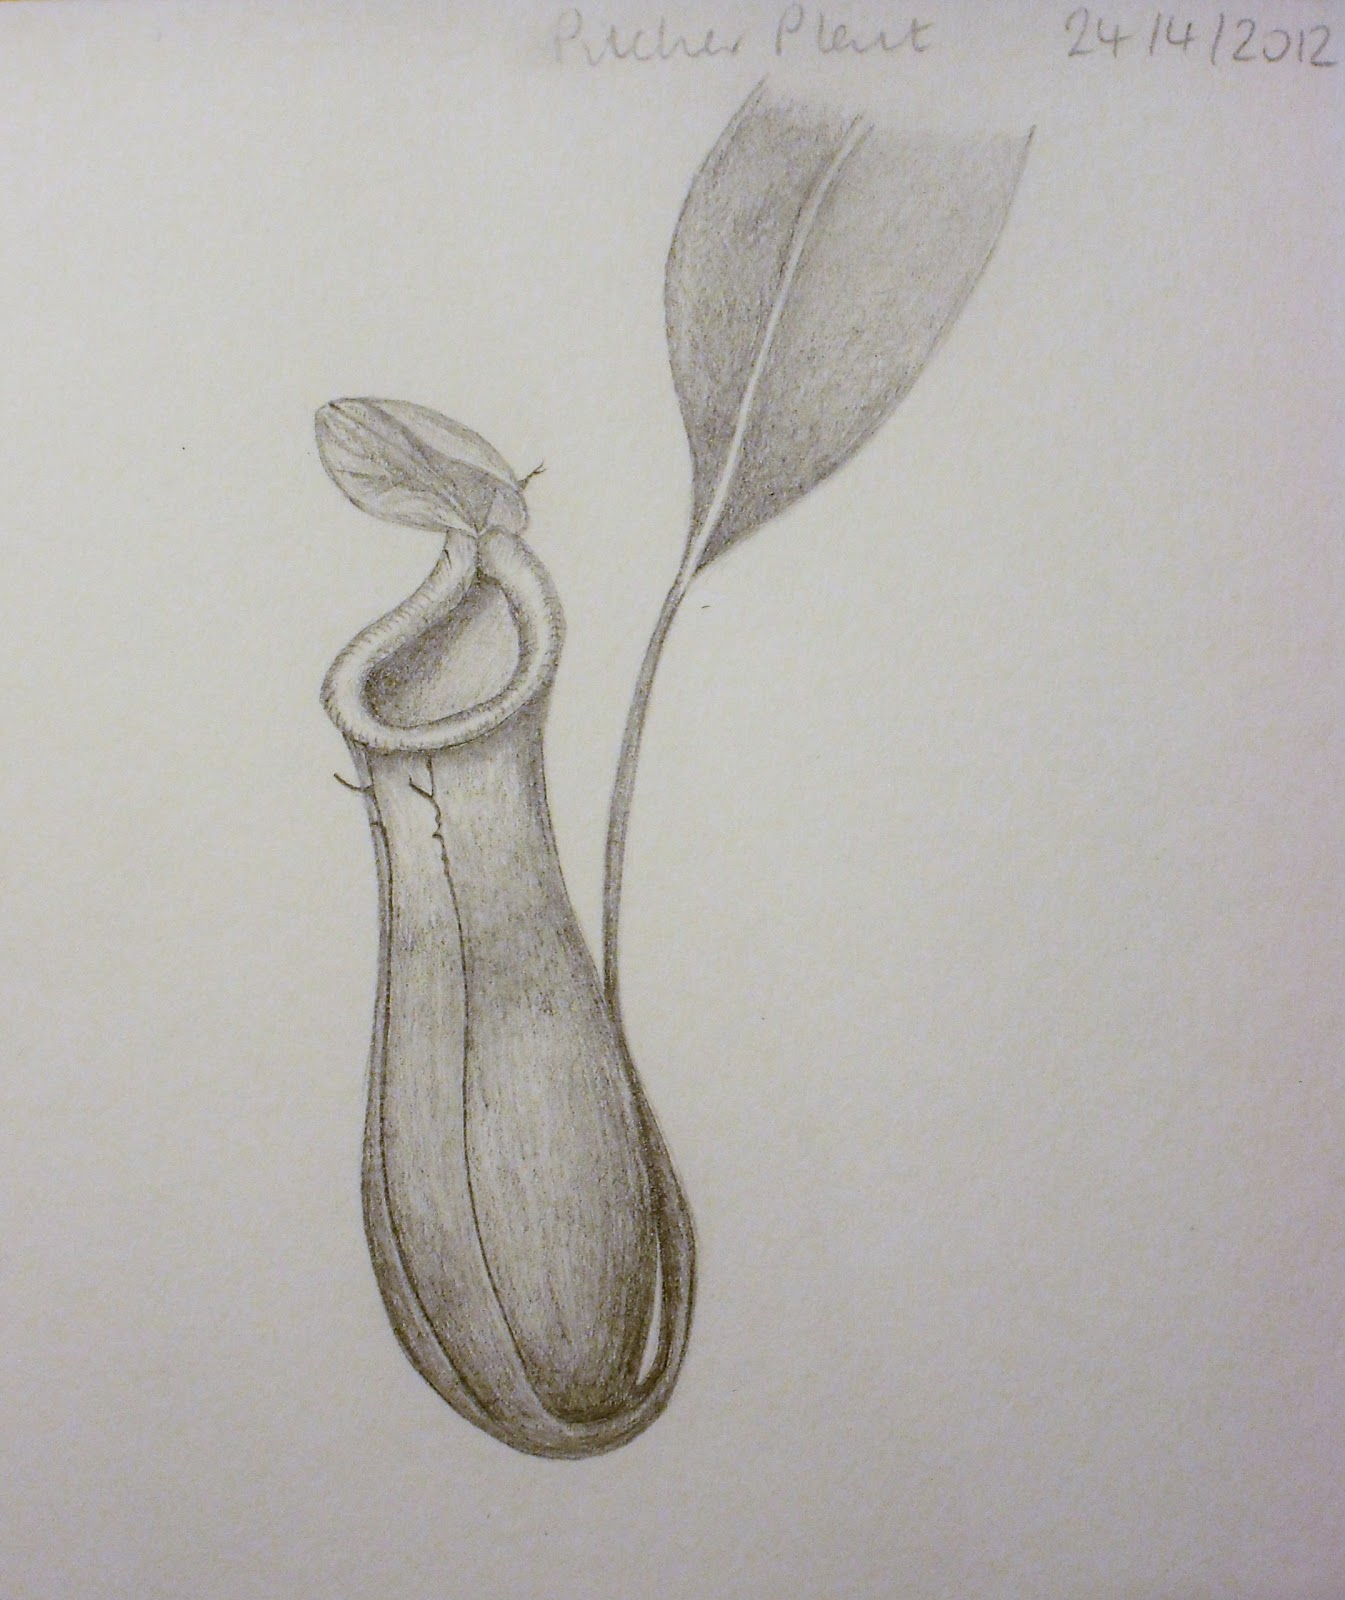  Drawings  of Botanical Things Pitcher  plant  Nepenthes